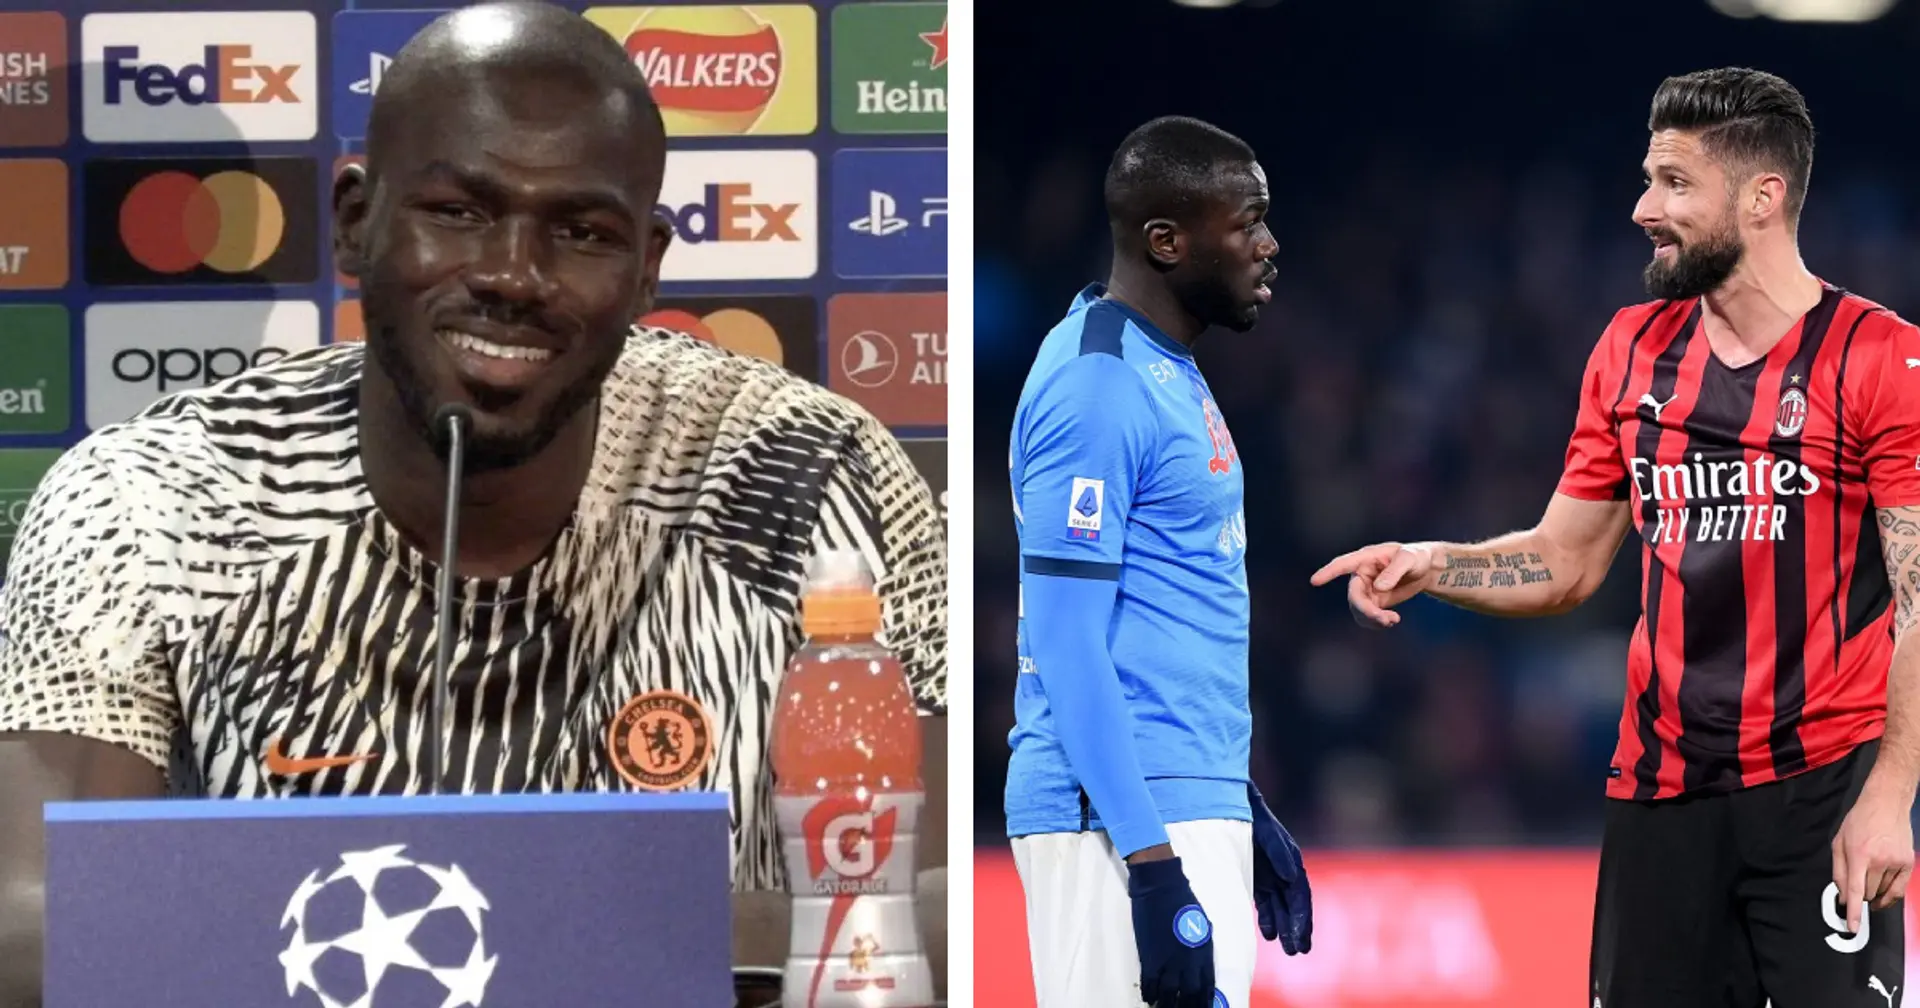 'He can score from anywhere': Koulibaly prepares to face Giroud